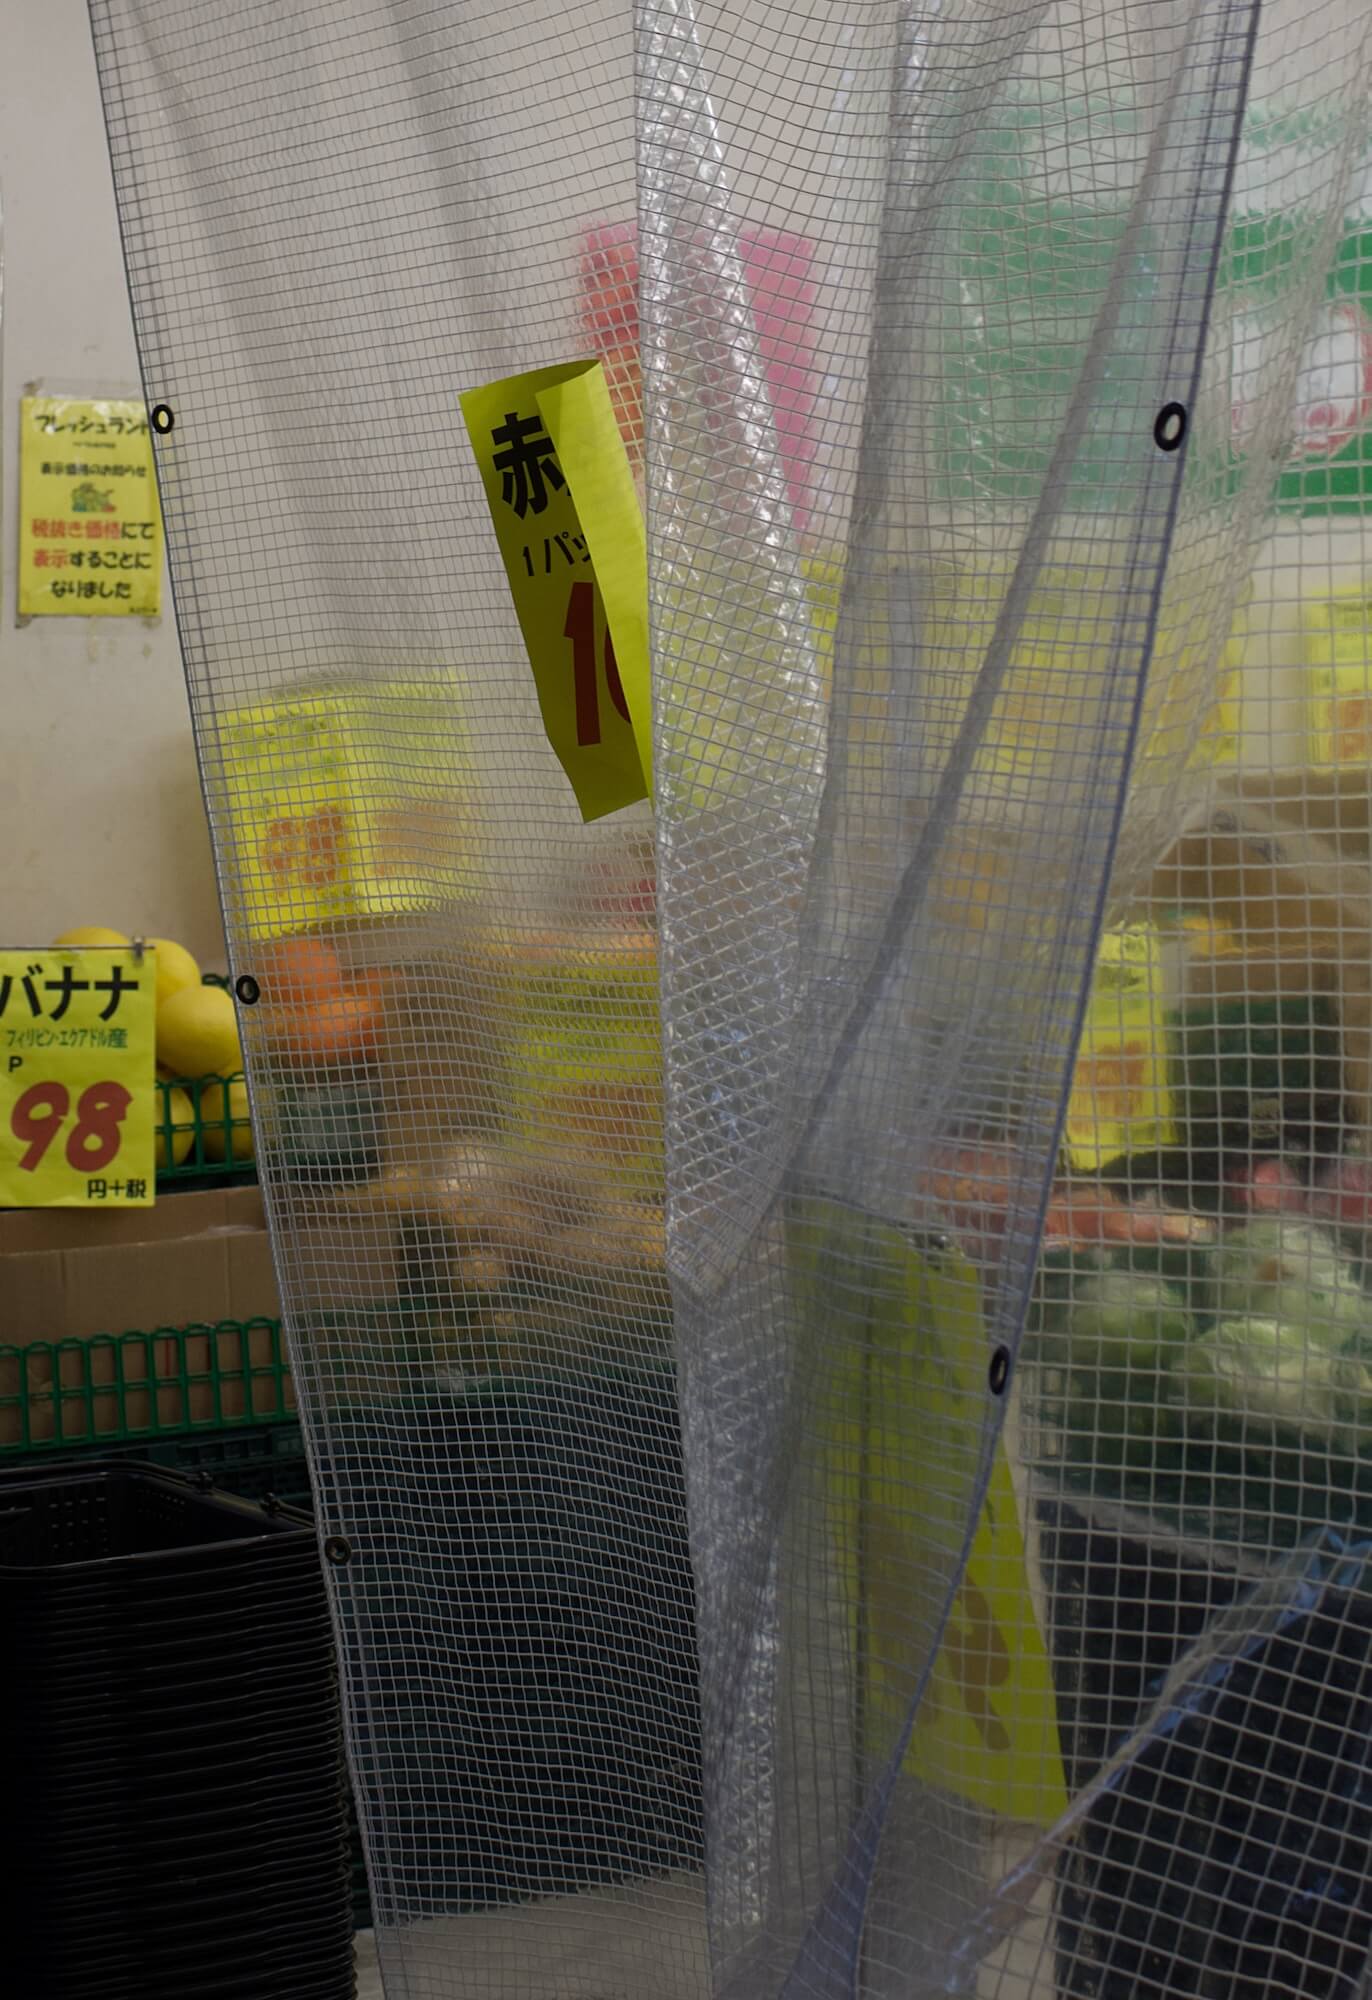 A greengrocer. A plastic sheet covers the frame and bright yellow price tags can be seen tucked amongst the produce